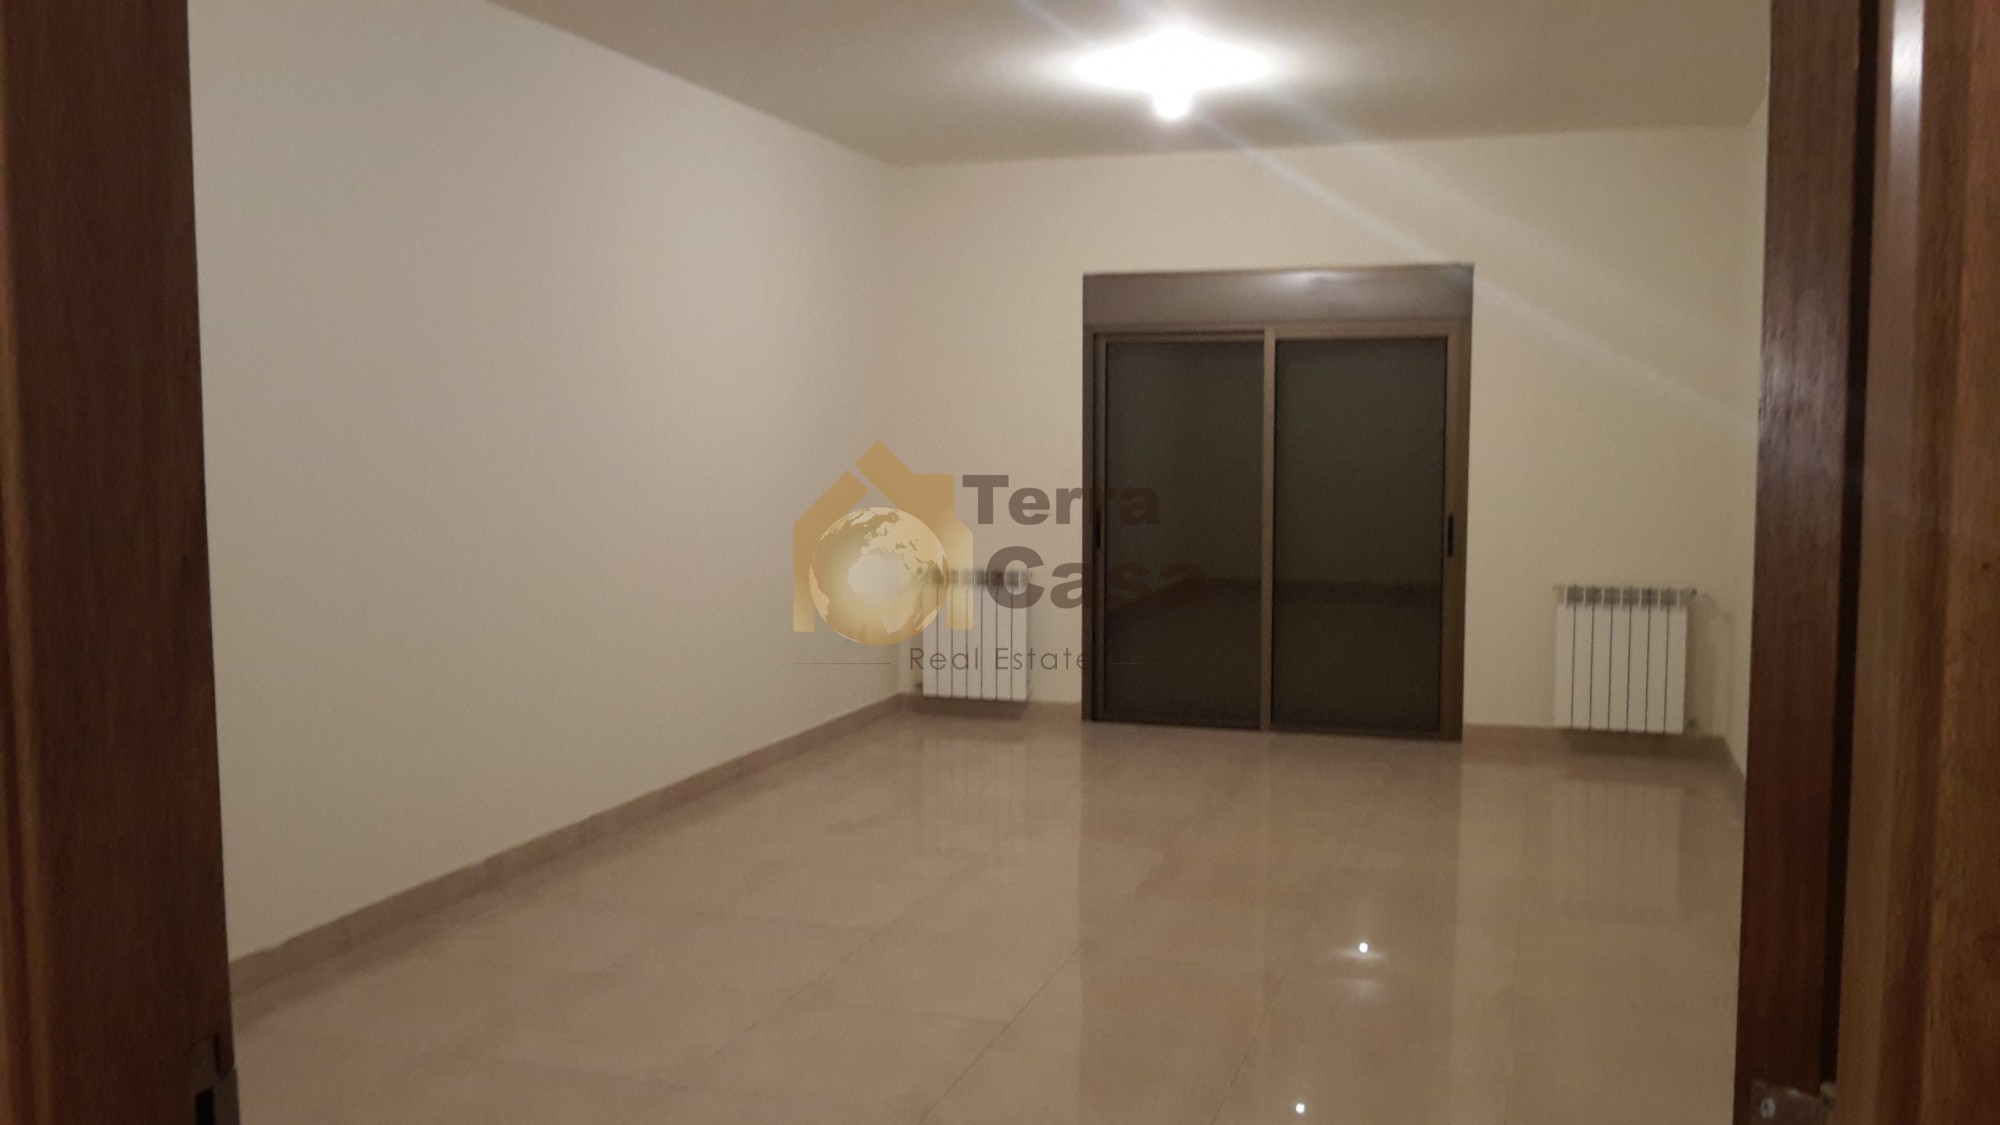 Apartment for sale in Haouch el omara brand new  in a prime location .